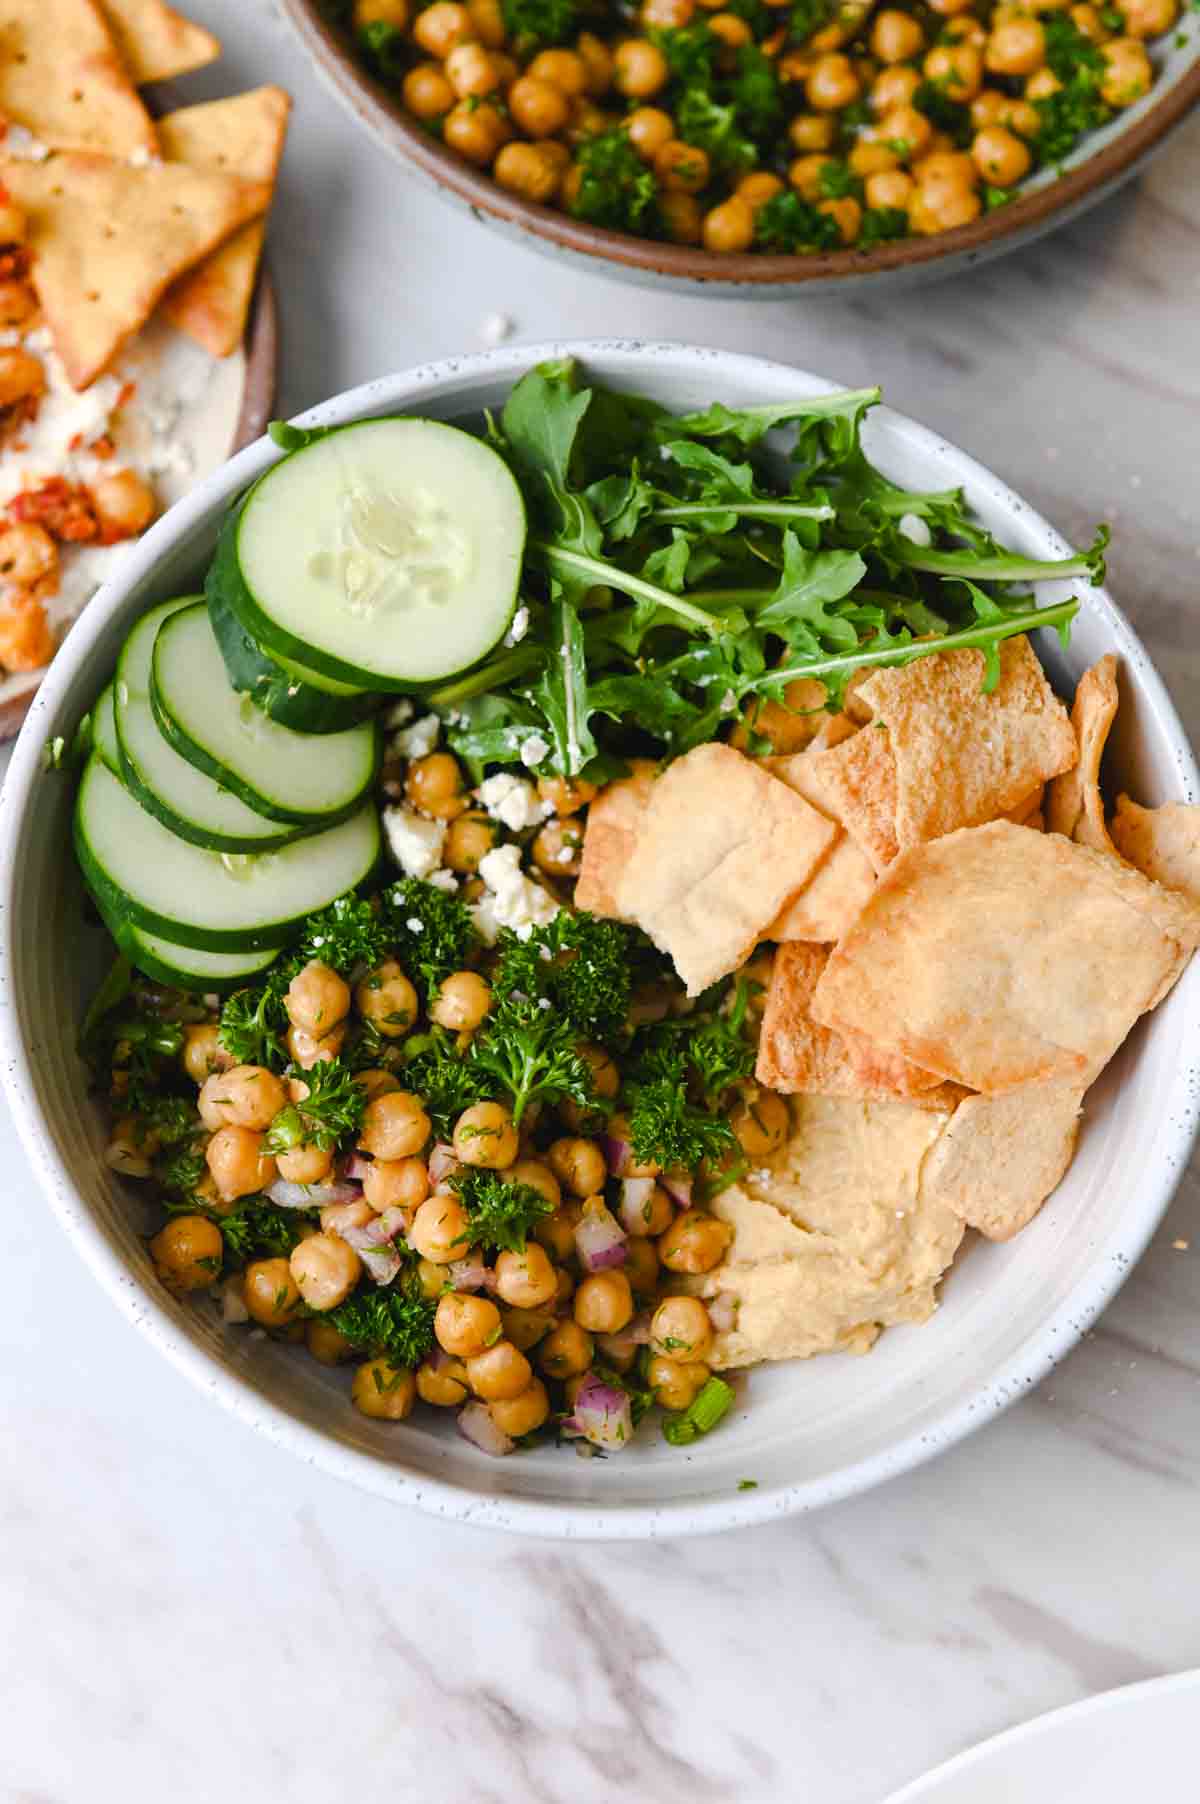 White bowl filled with marinated chickpeas, pita chips, feta, cucumber, and arugula.